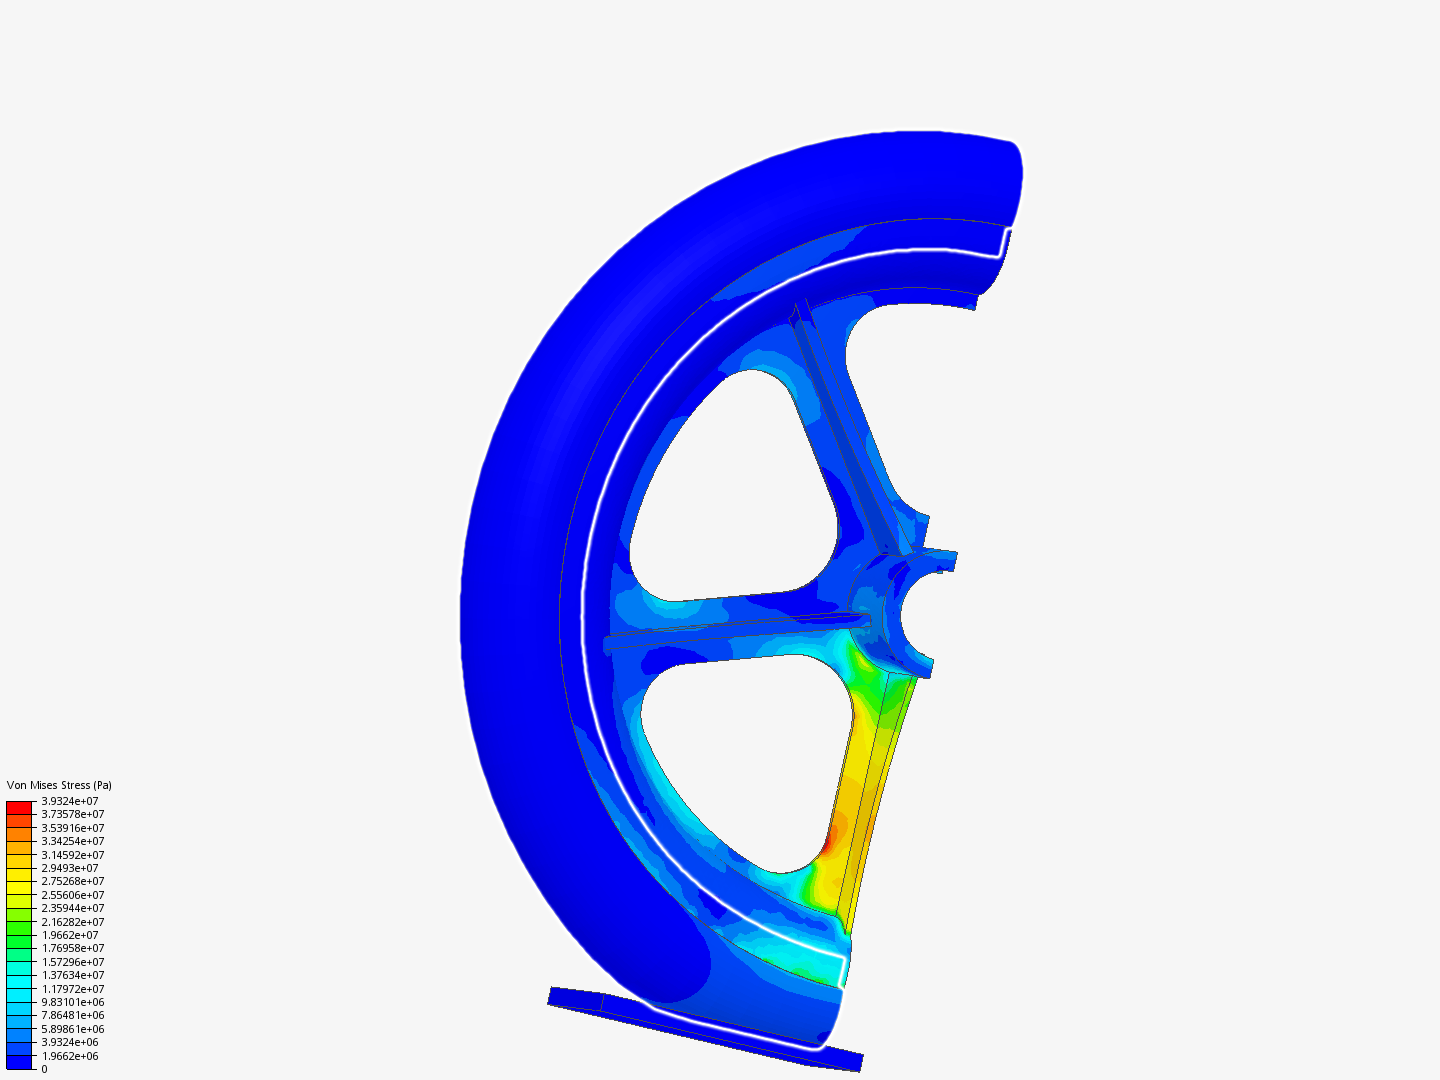 Plate 3: Nonlinear Structural Analysis of a Wheel image